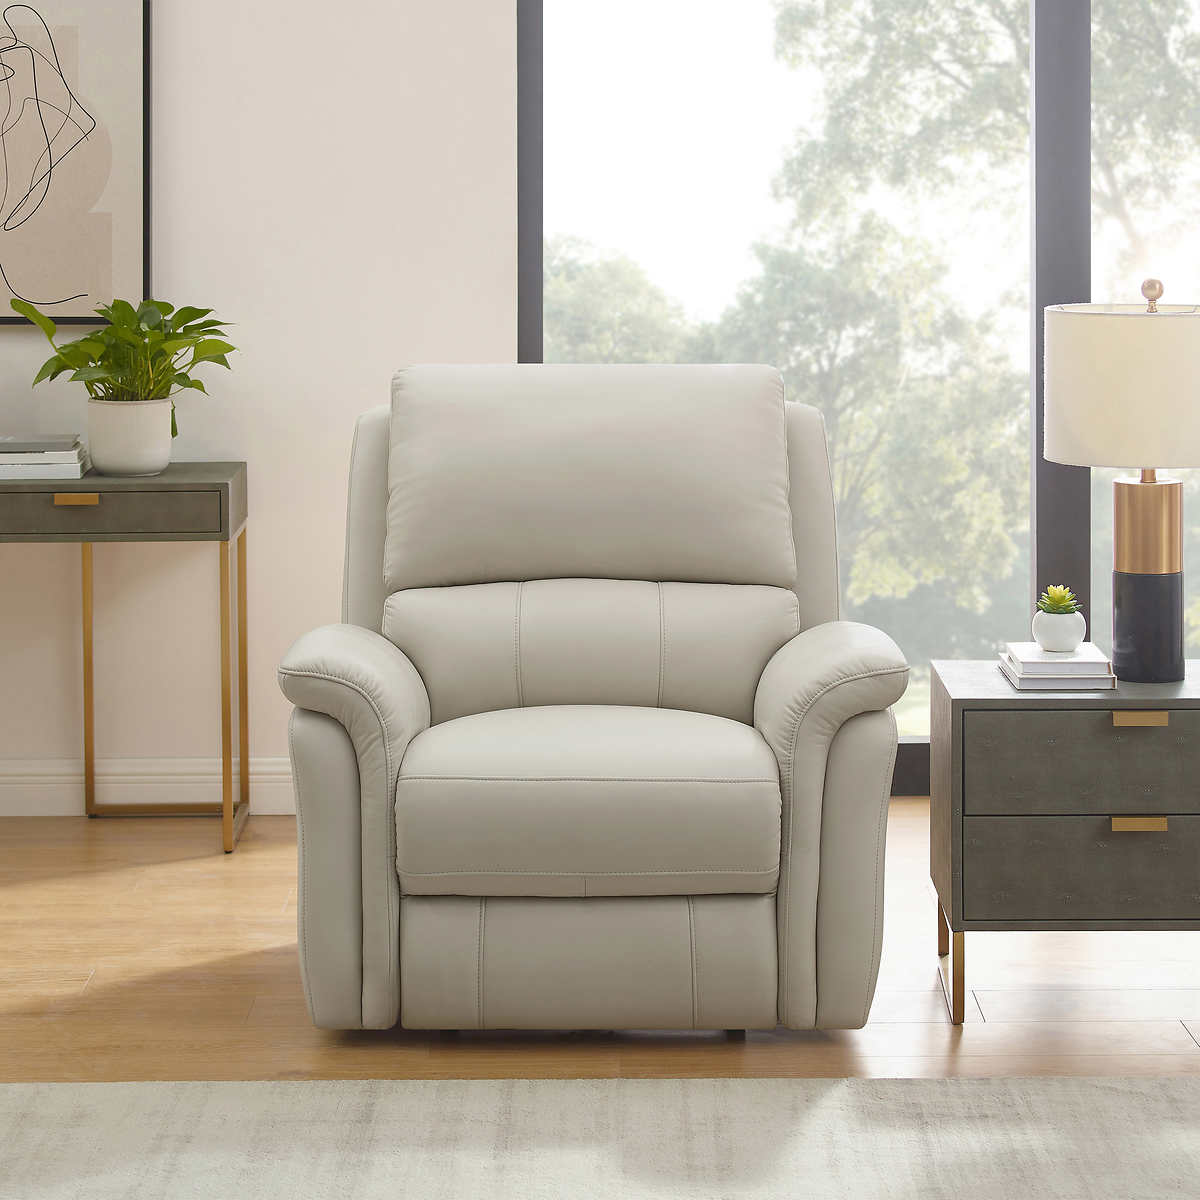 Marino Traditional Top Grain Leather Power Reclining Chair with